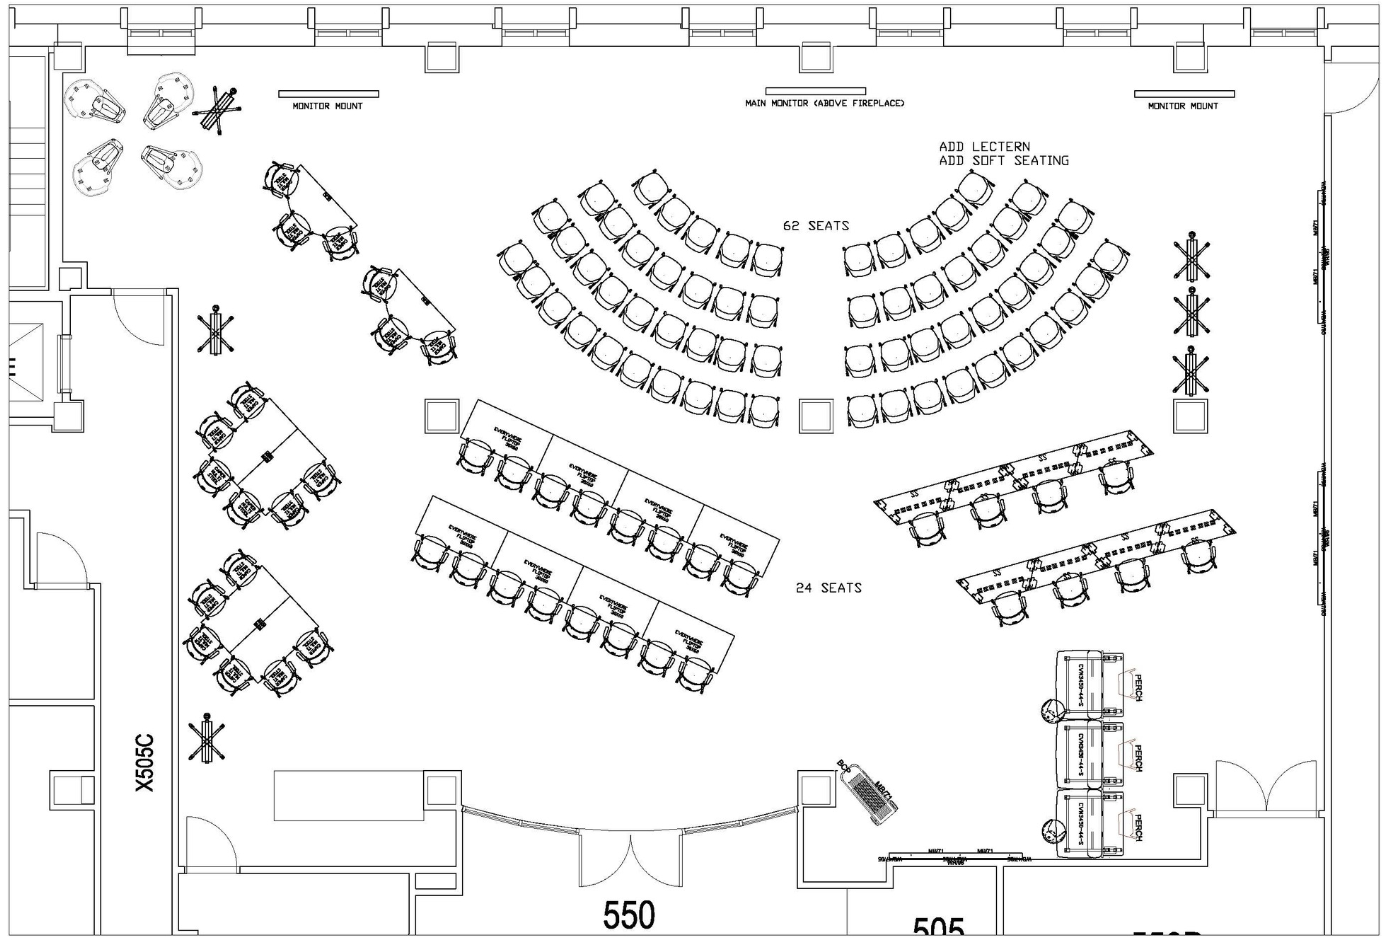 seminar furniture layout for room 550